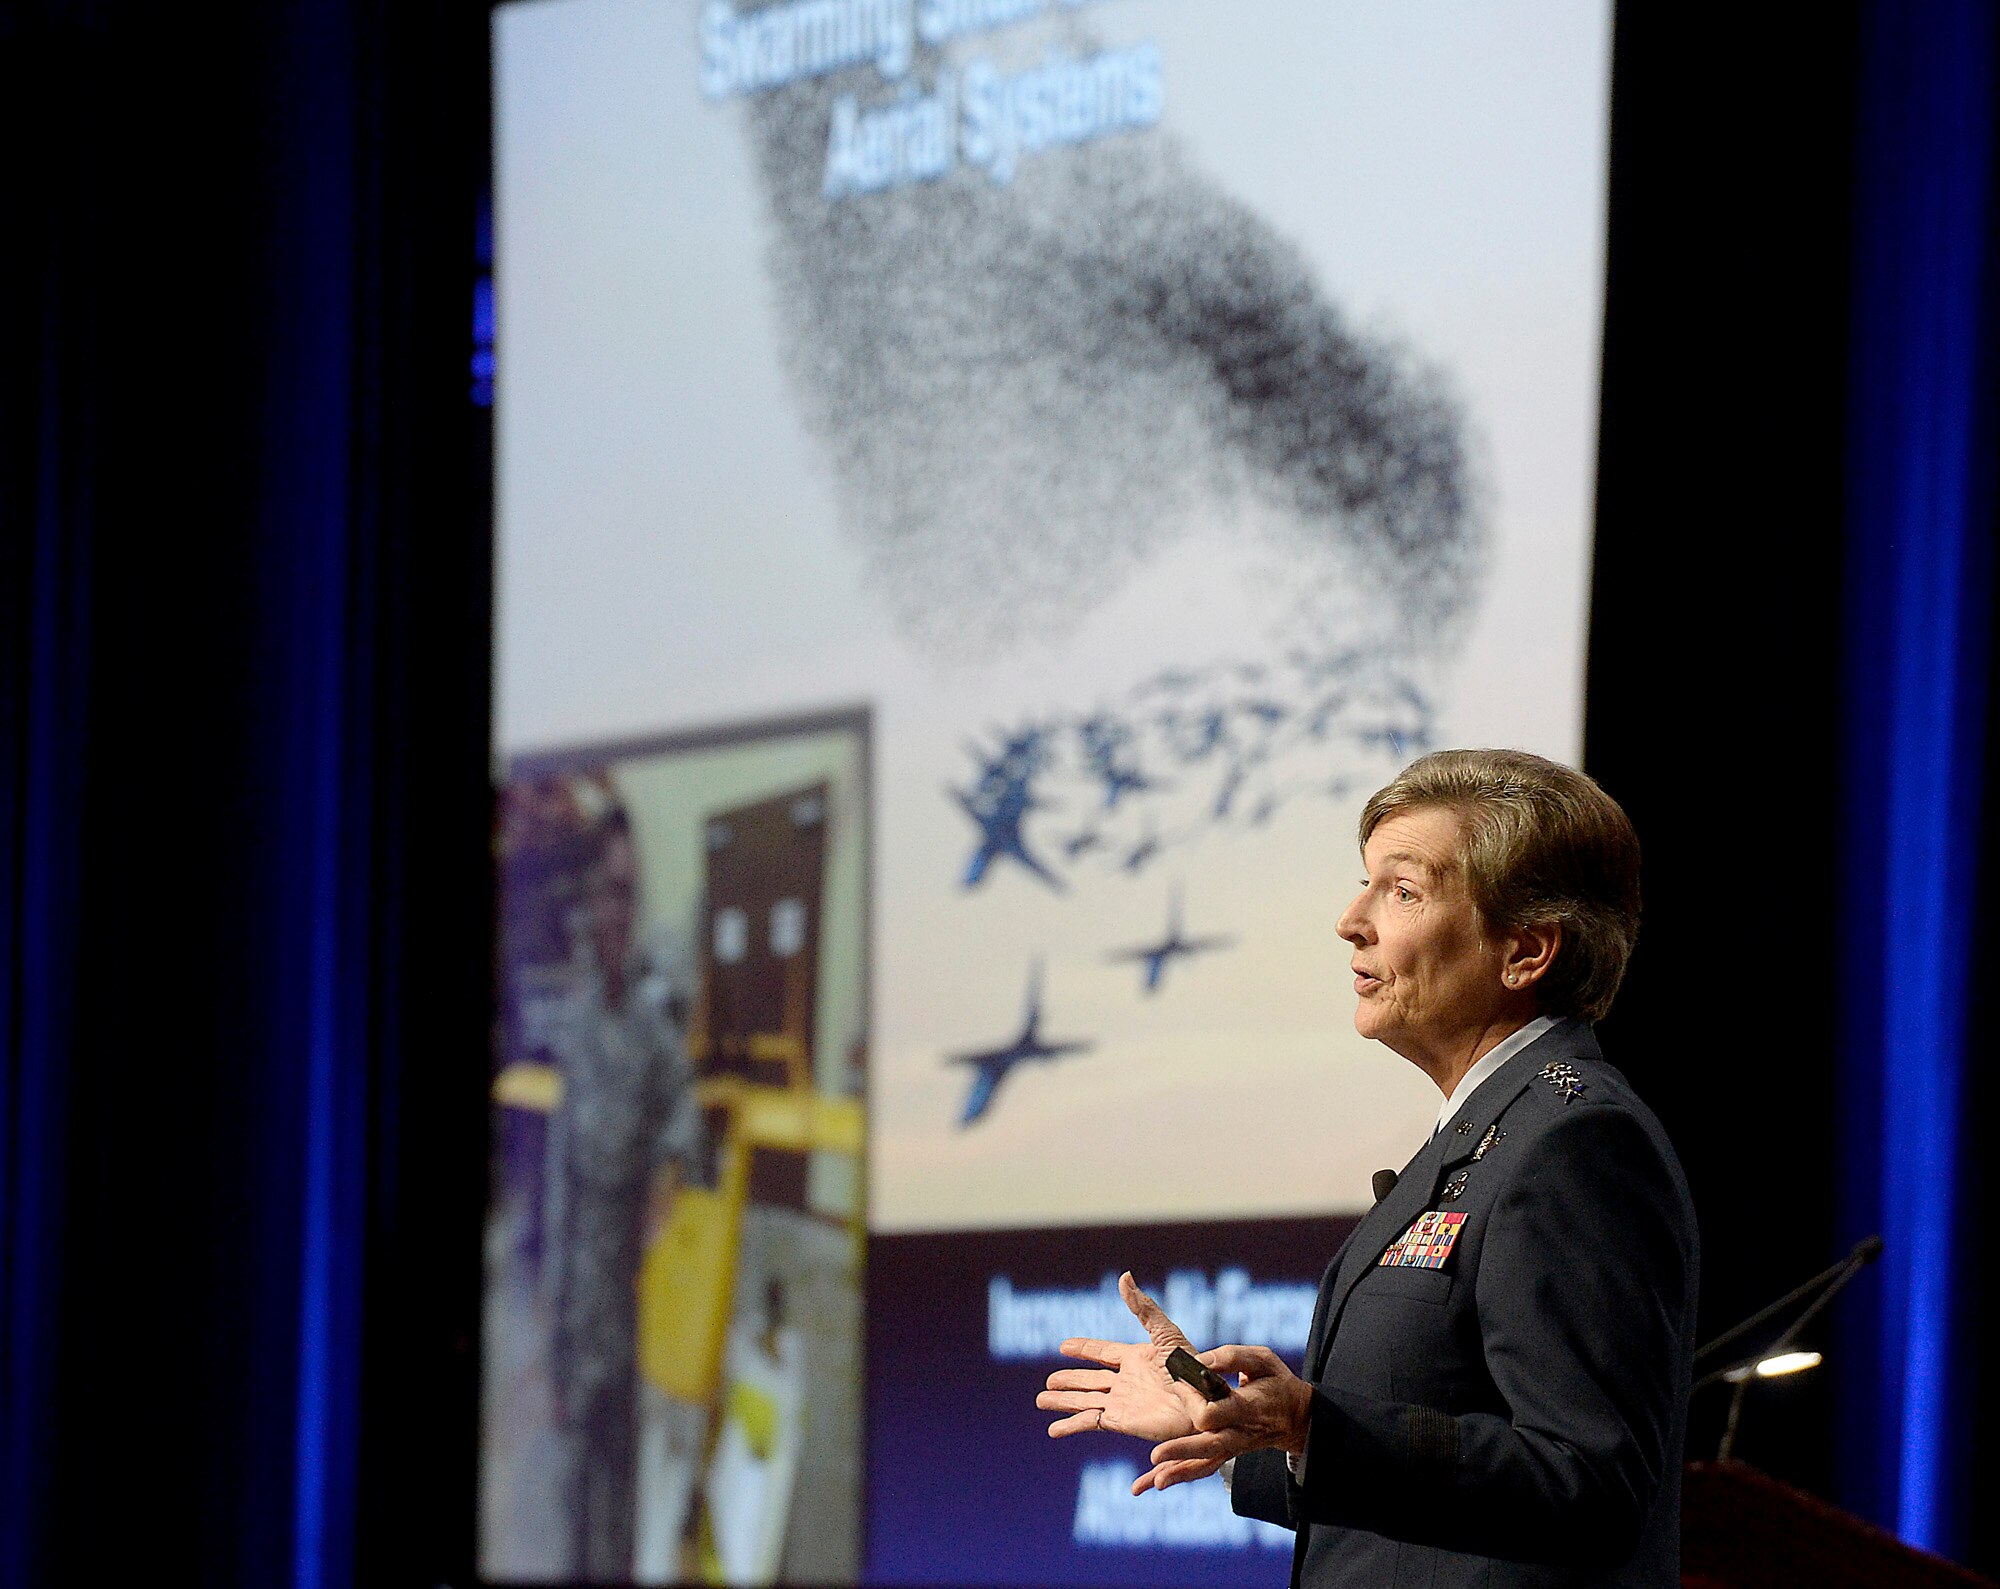 Gen. Ellen M. Pawlikowski, the commander of the Air Force Materiel Command, speaks about her command's flexibility and how it directly impacts the total force's operations and strategic agility at the Air Force Association Air and Space Conference and Technology Exposition Sept. 15, 2015, in Washington, D.C.  (Air Force photo/Scott M. Ash)  